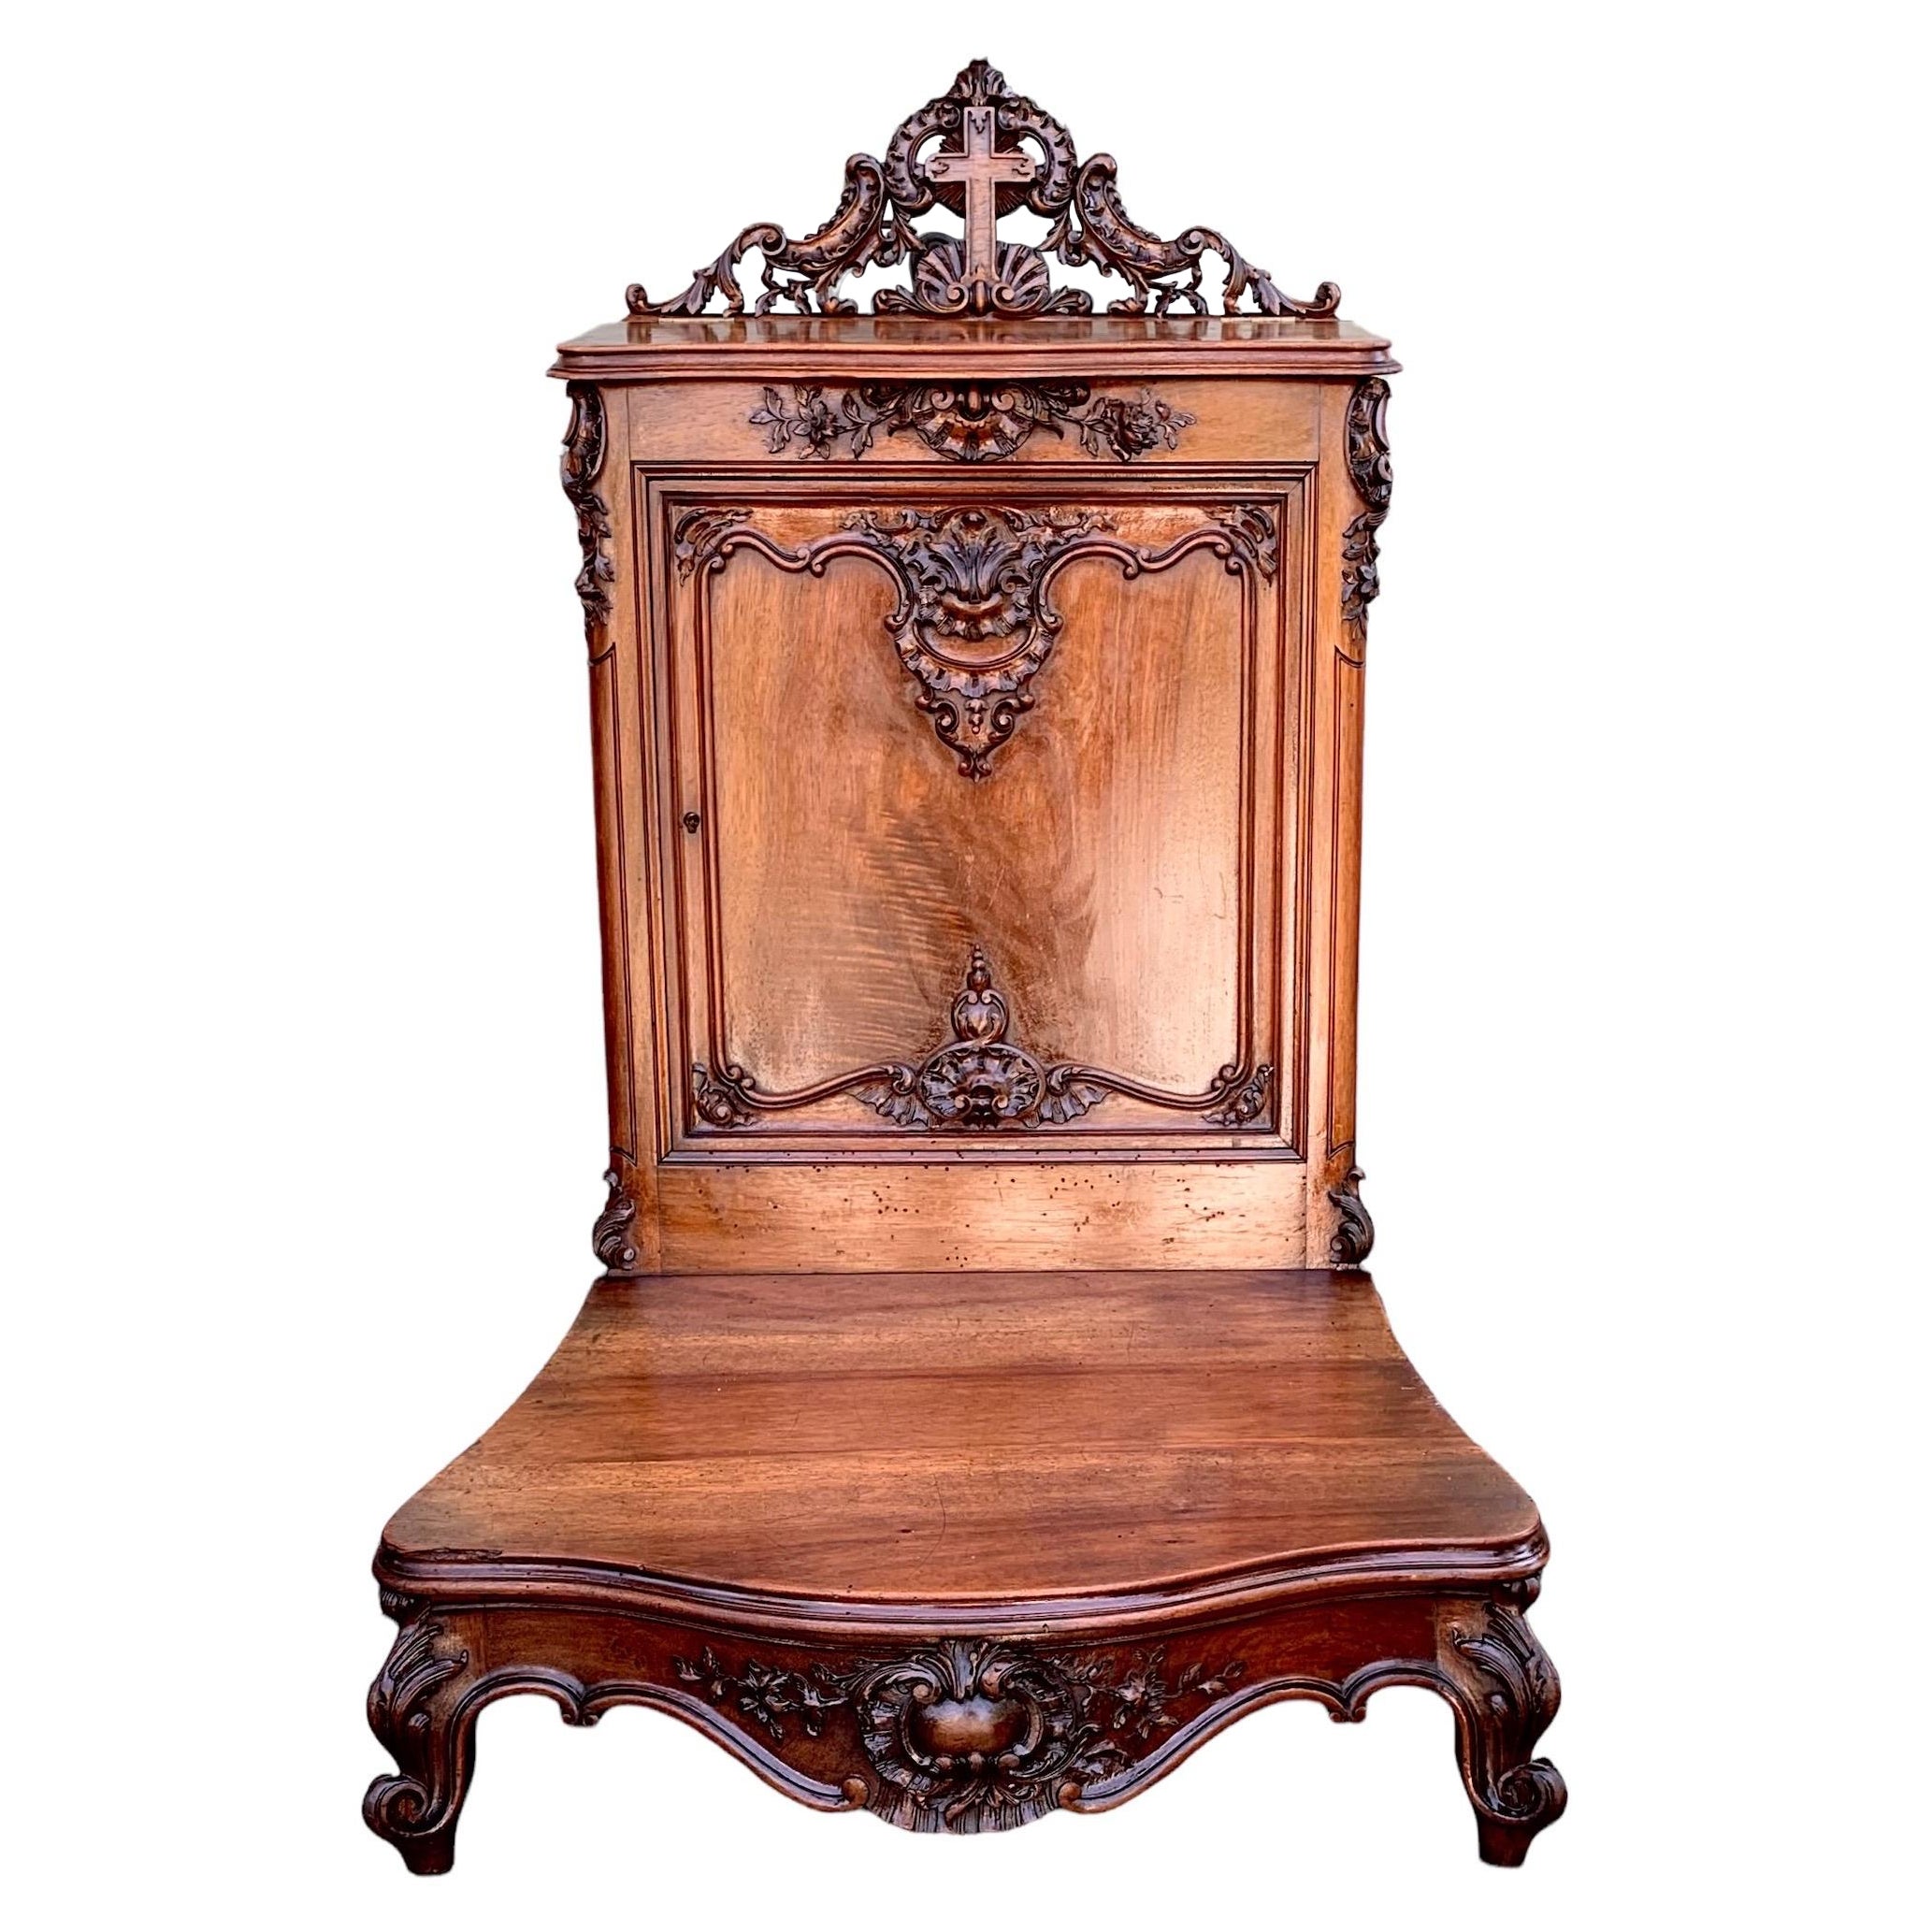 Antique French Provincial Carved Walnut Louie XV Style Prie-Dieu